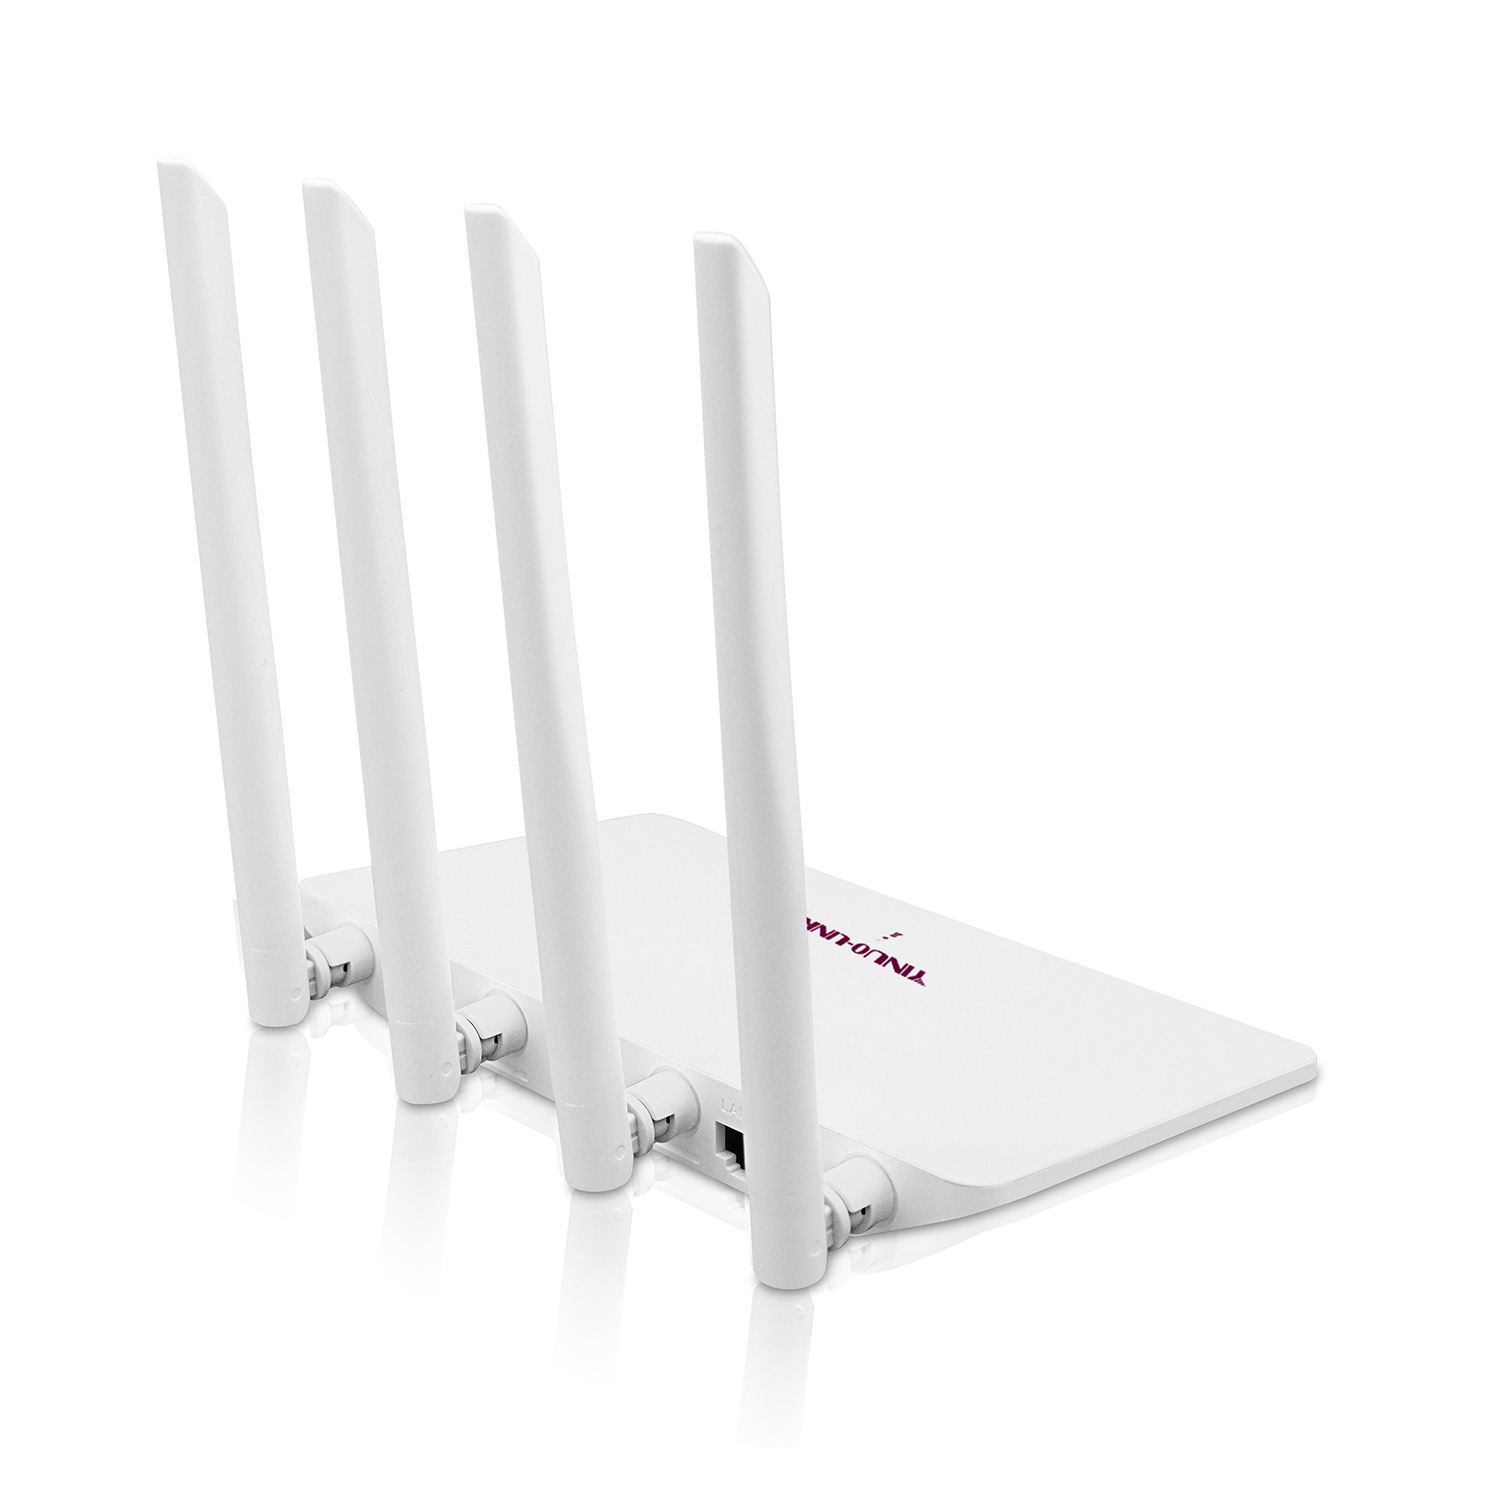 Experience Unparalleled Connectivity with the YINUO-LINK Y6 300Mbps Wi-Fi 4G Router